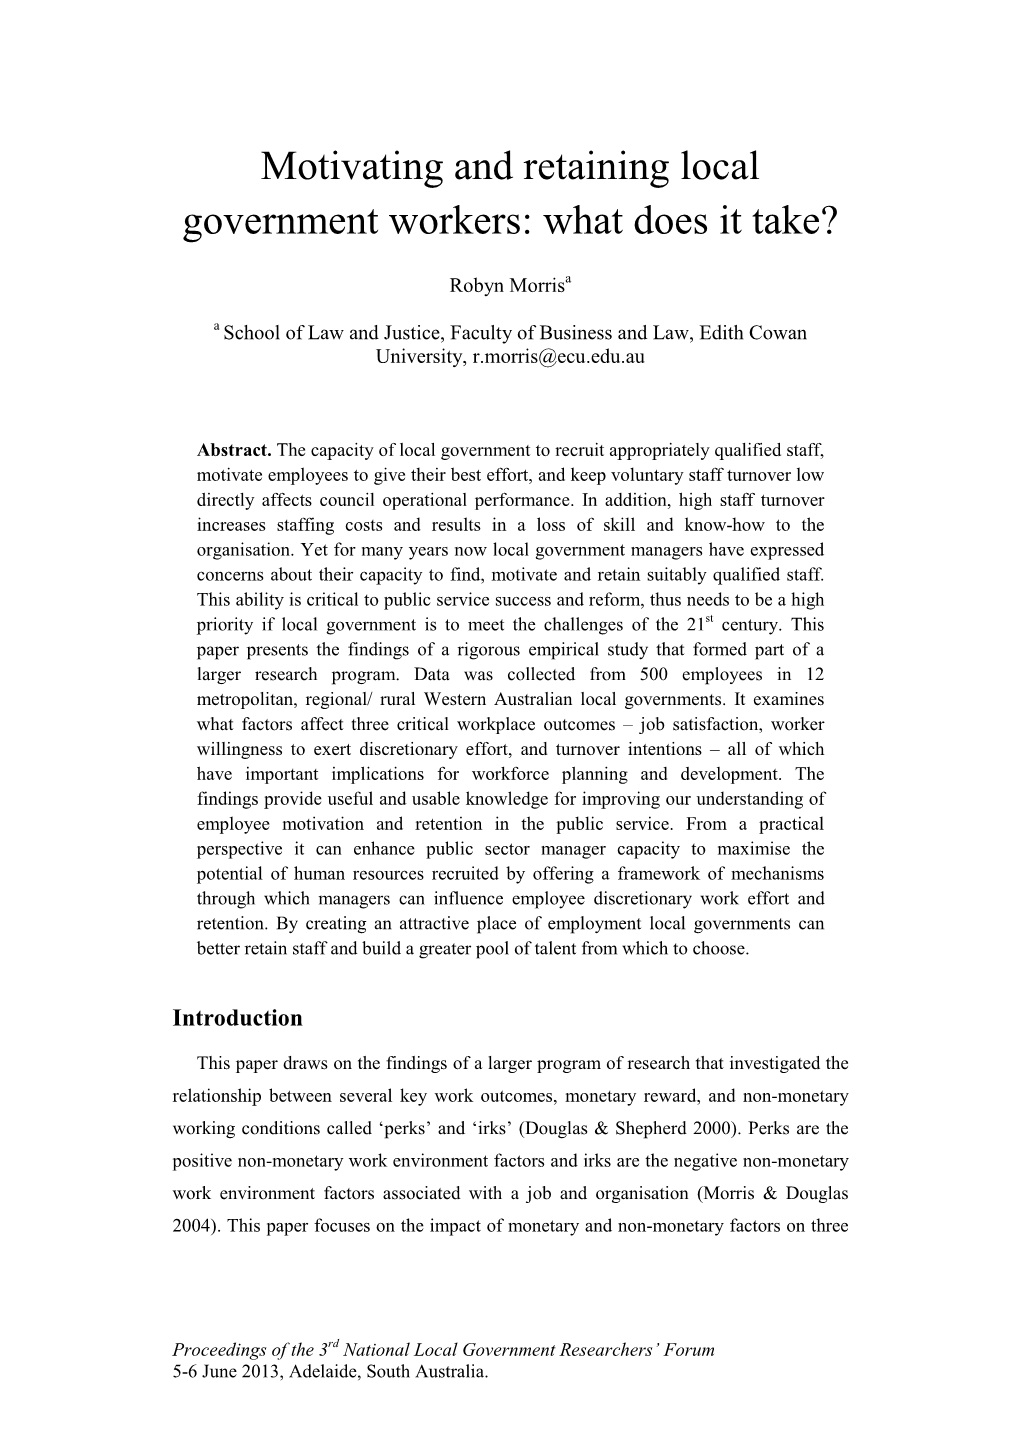 Motivating and Retaining Local Government Workers: What Does It Take?